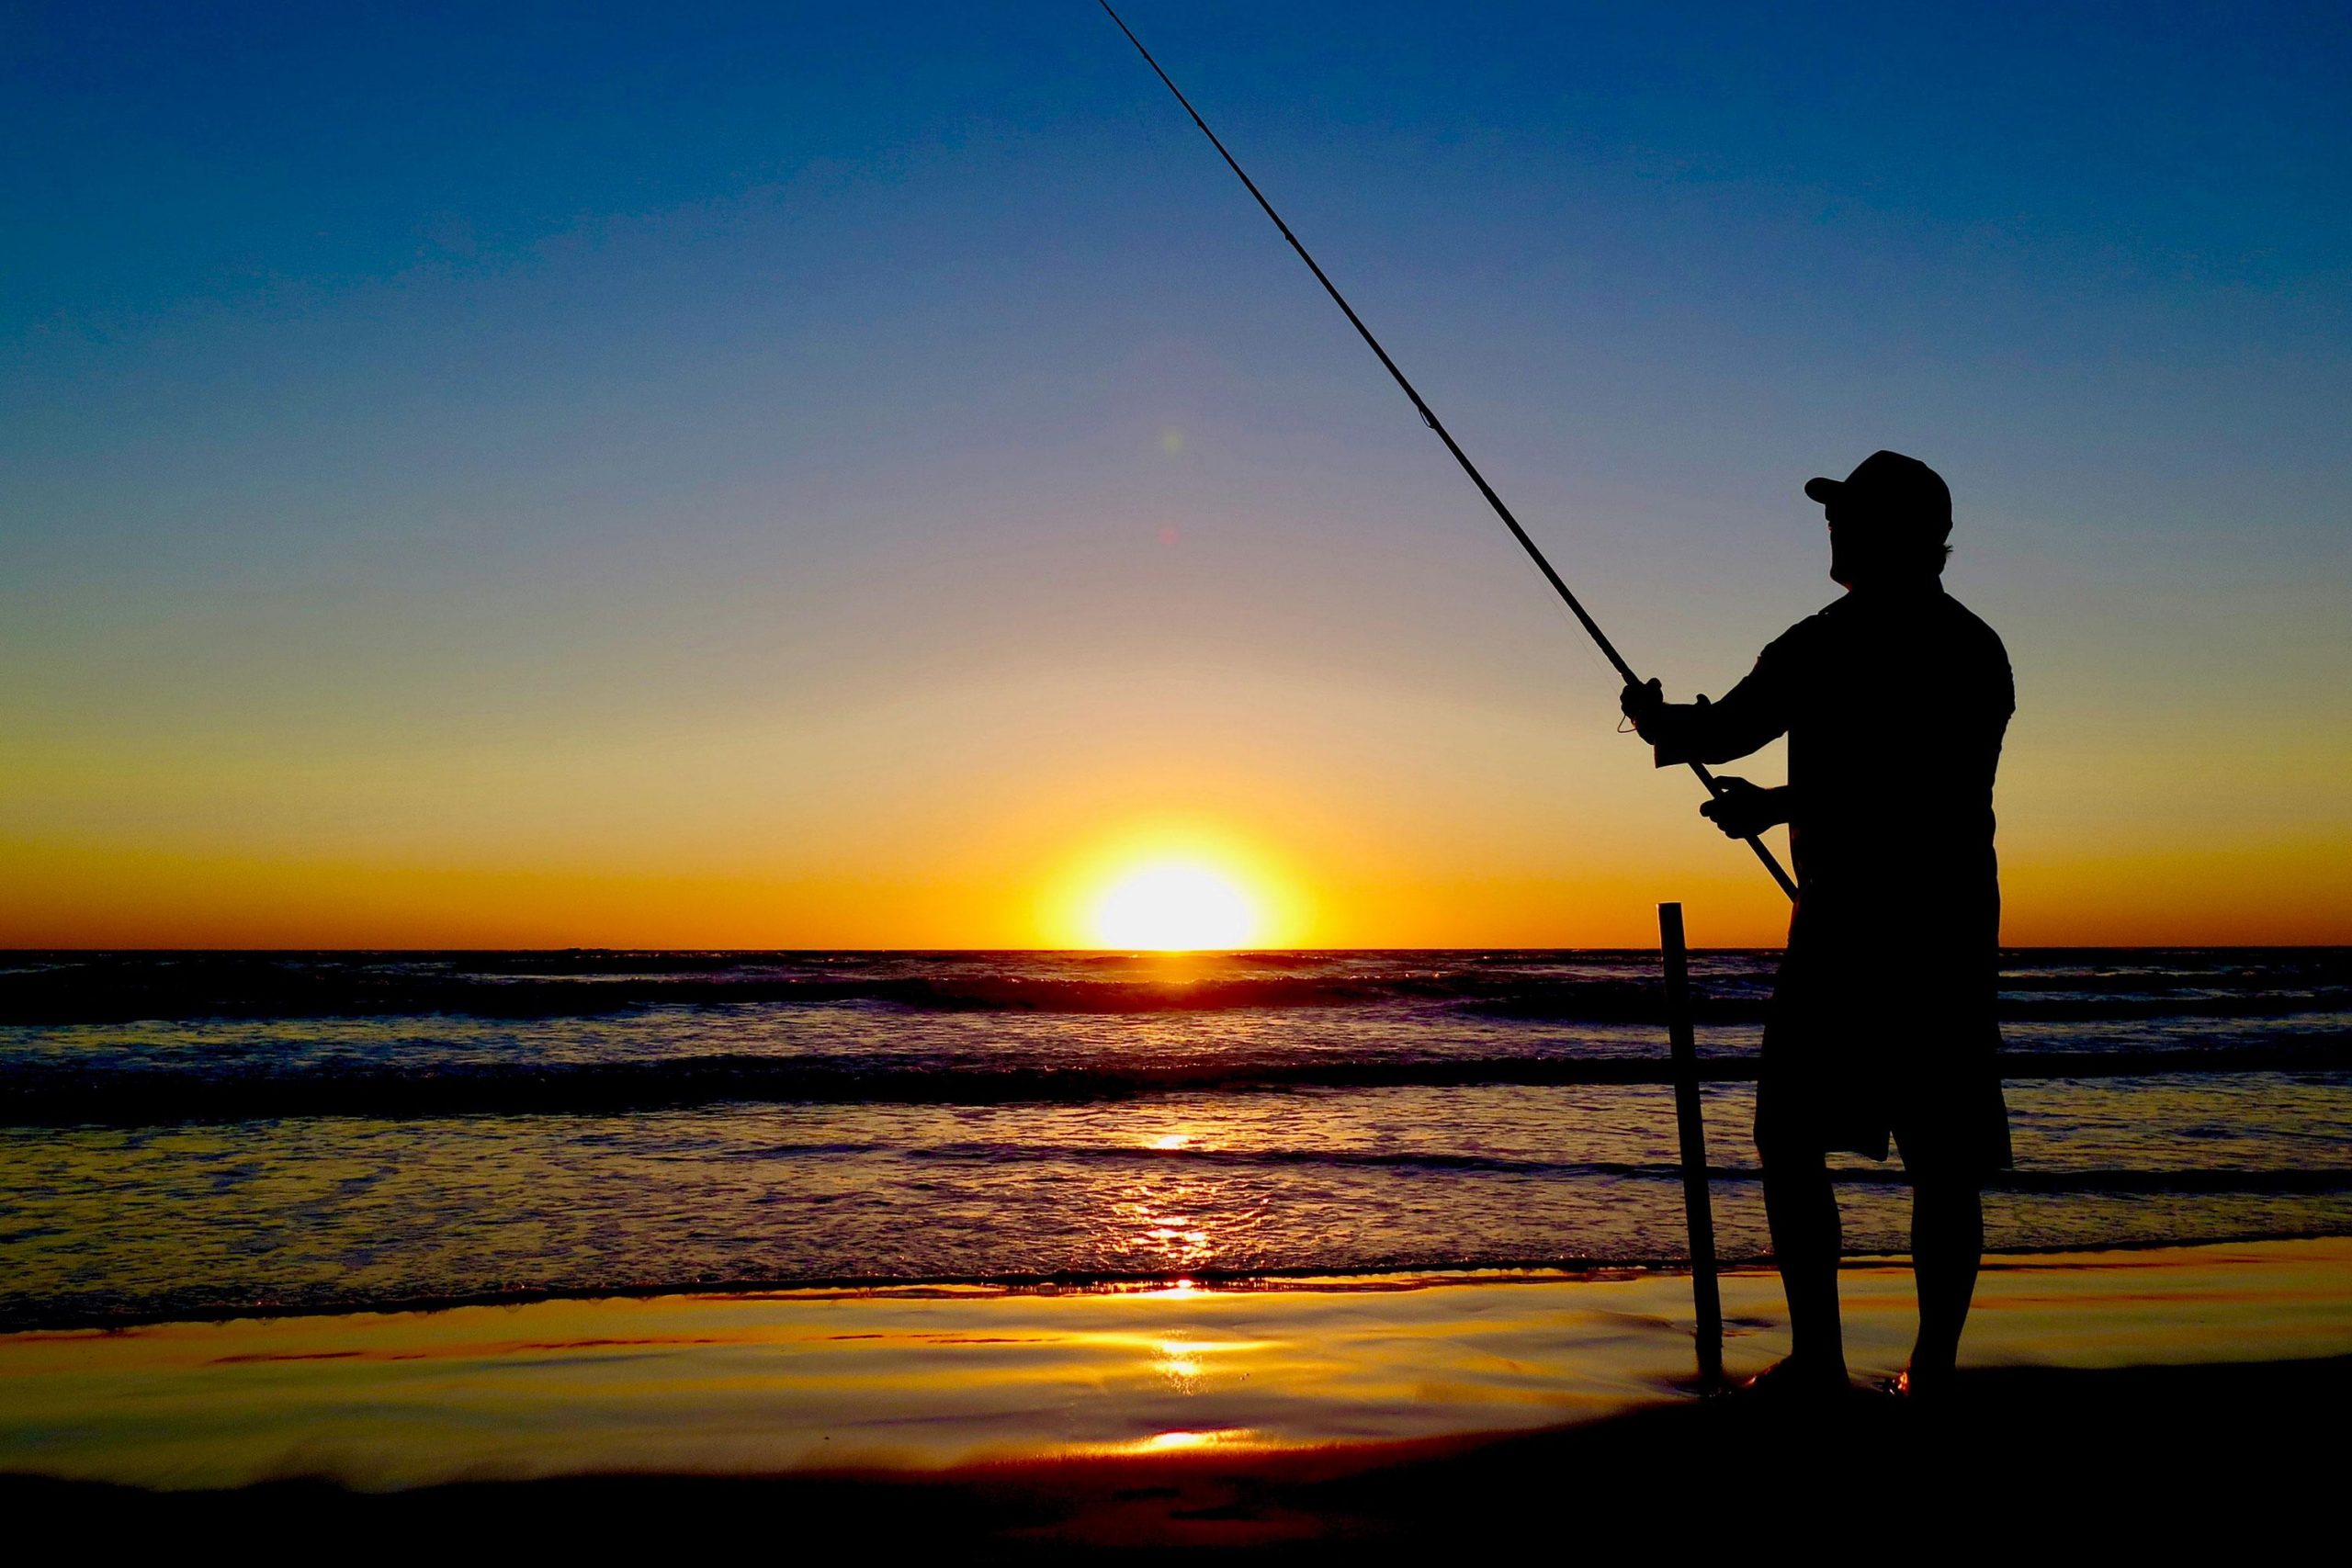 Night Beach Fishing with Beer and Snacks, Perth - Adventure in Nature